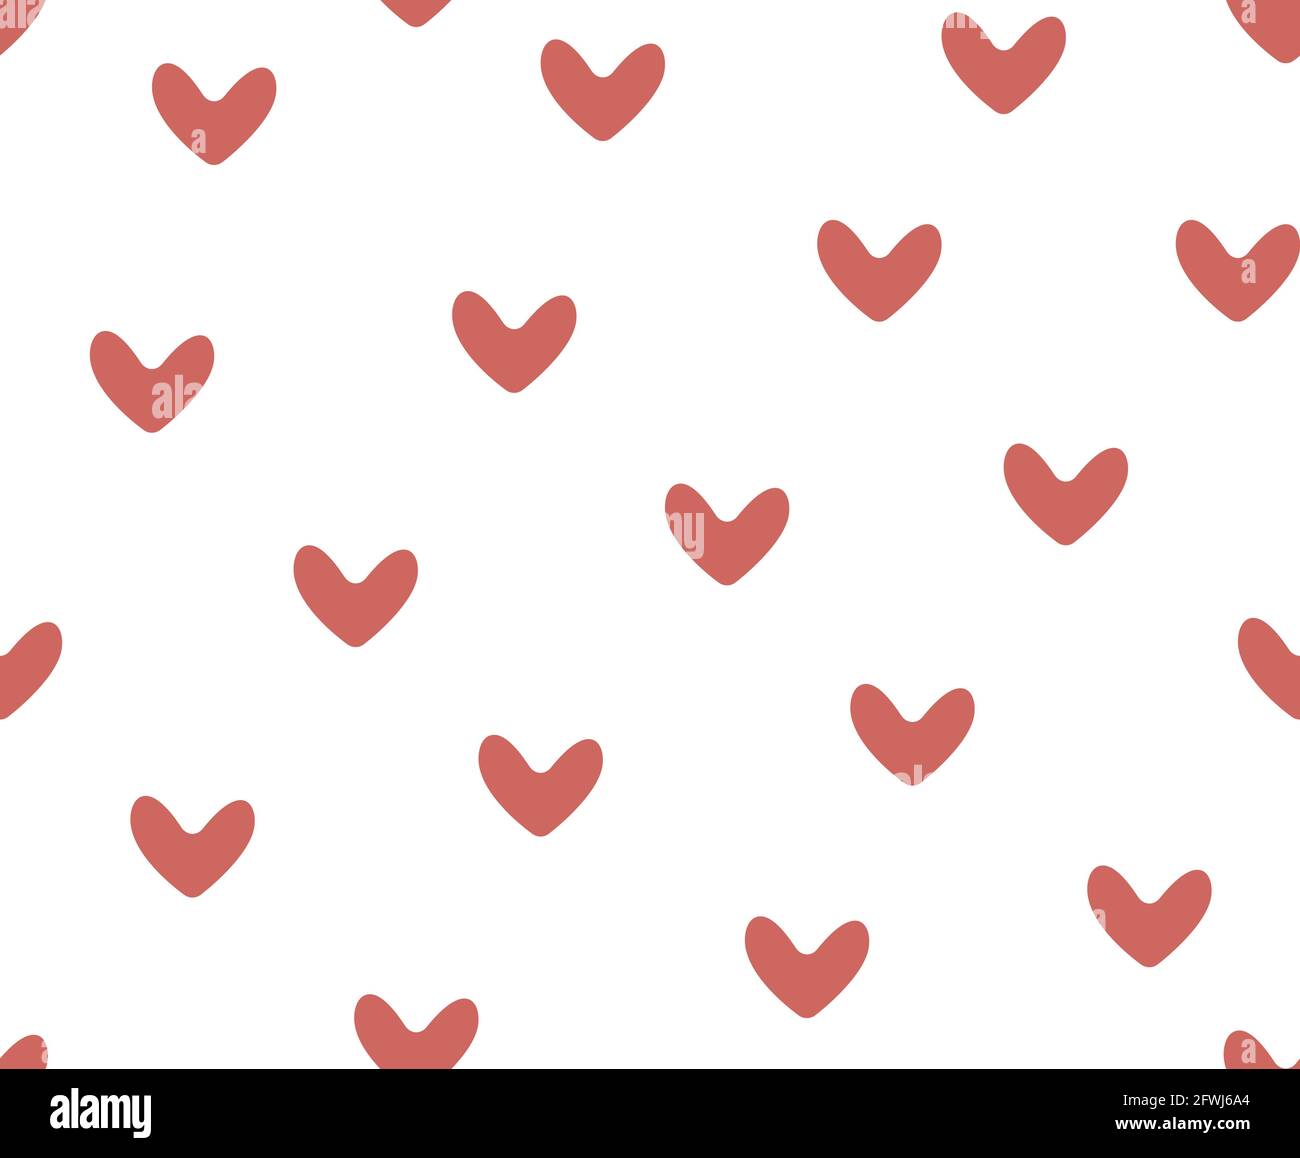 Seamless Background with Hearts Stock Vector  Illustration of abstract  love 83672418